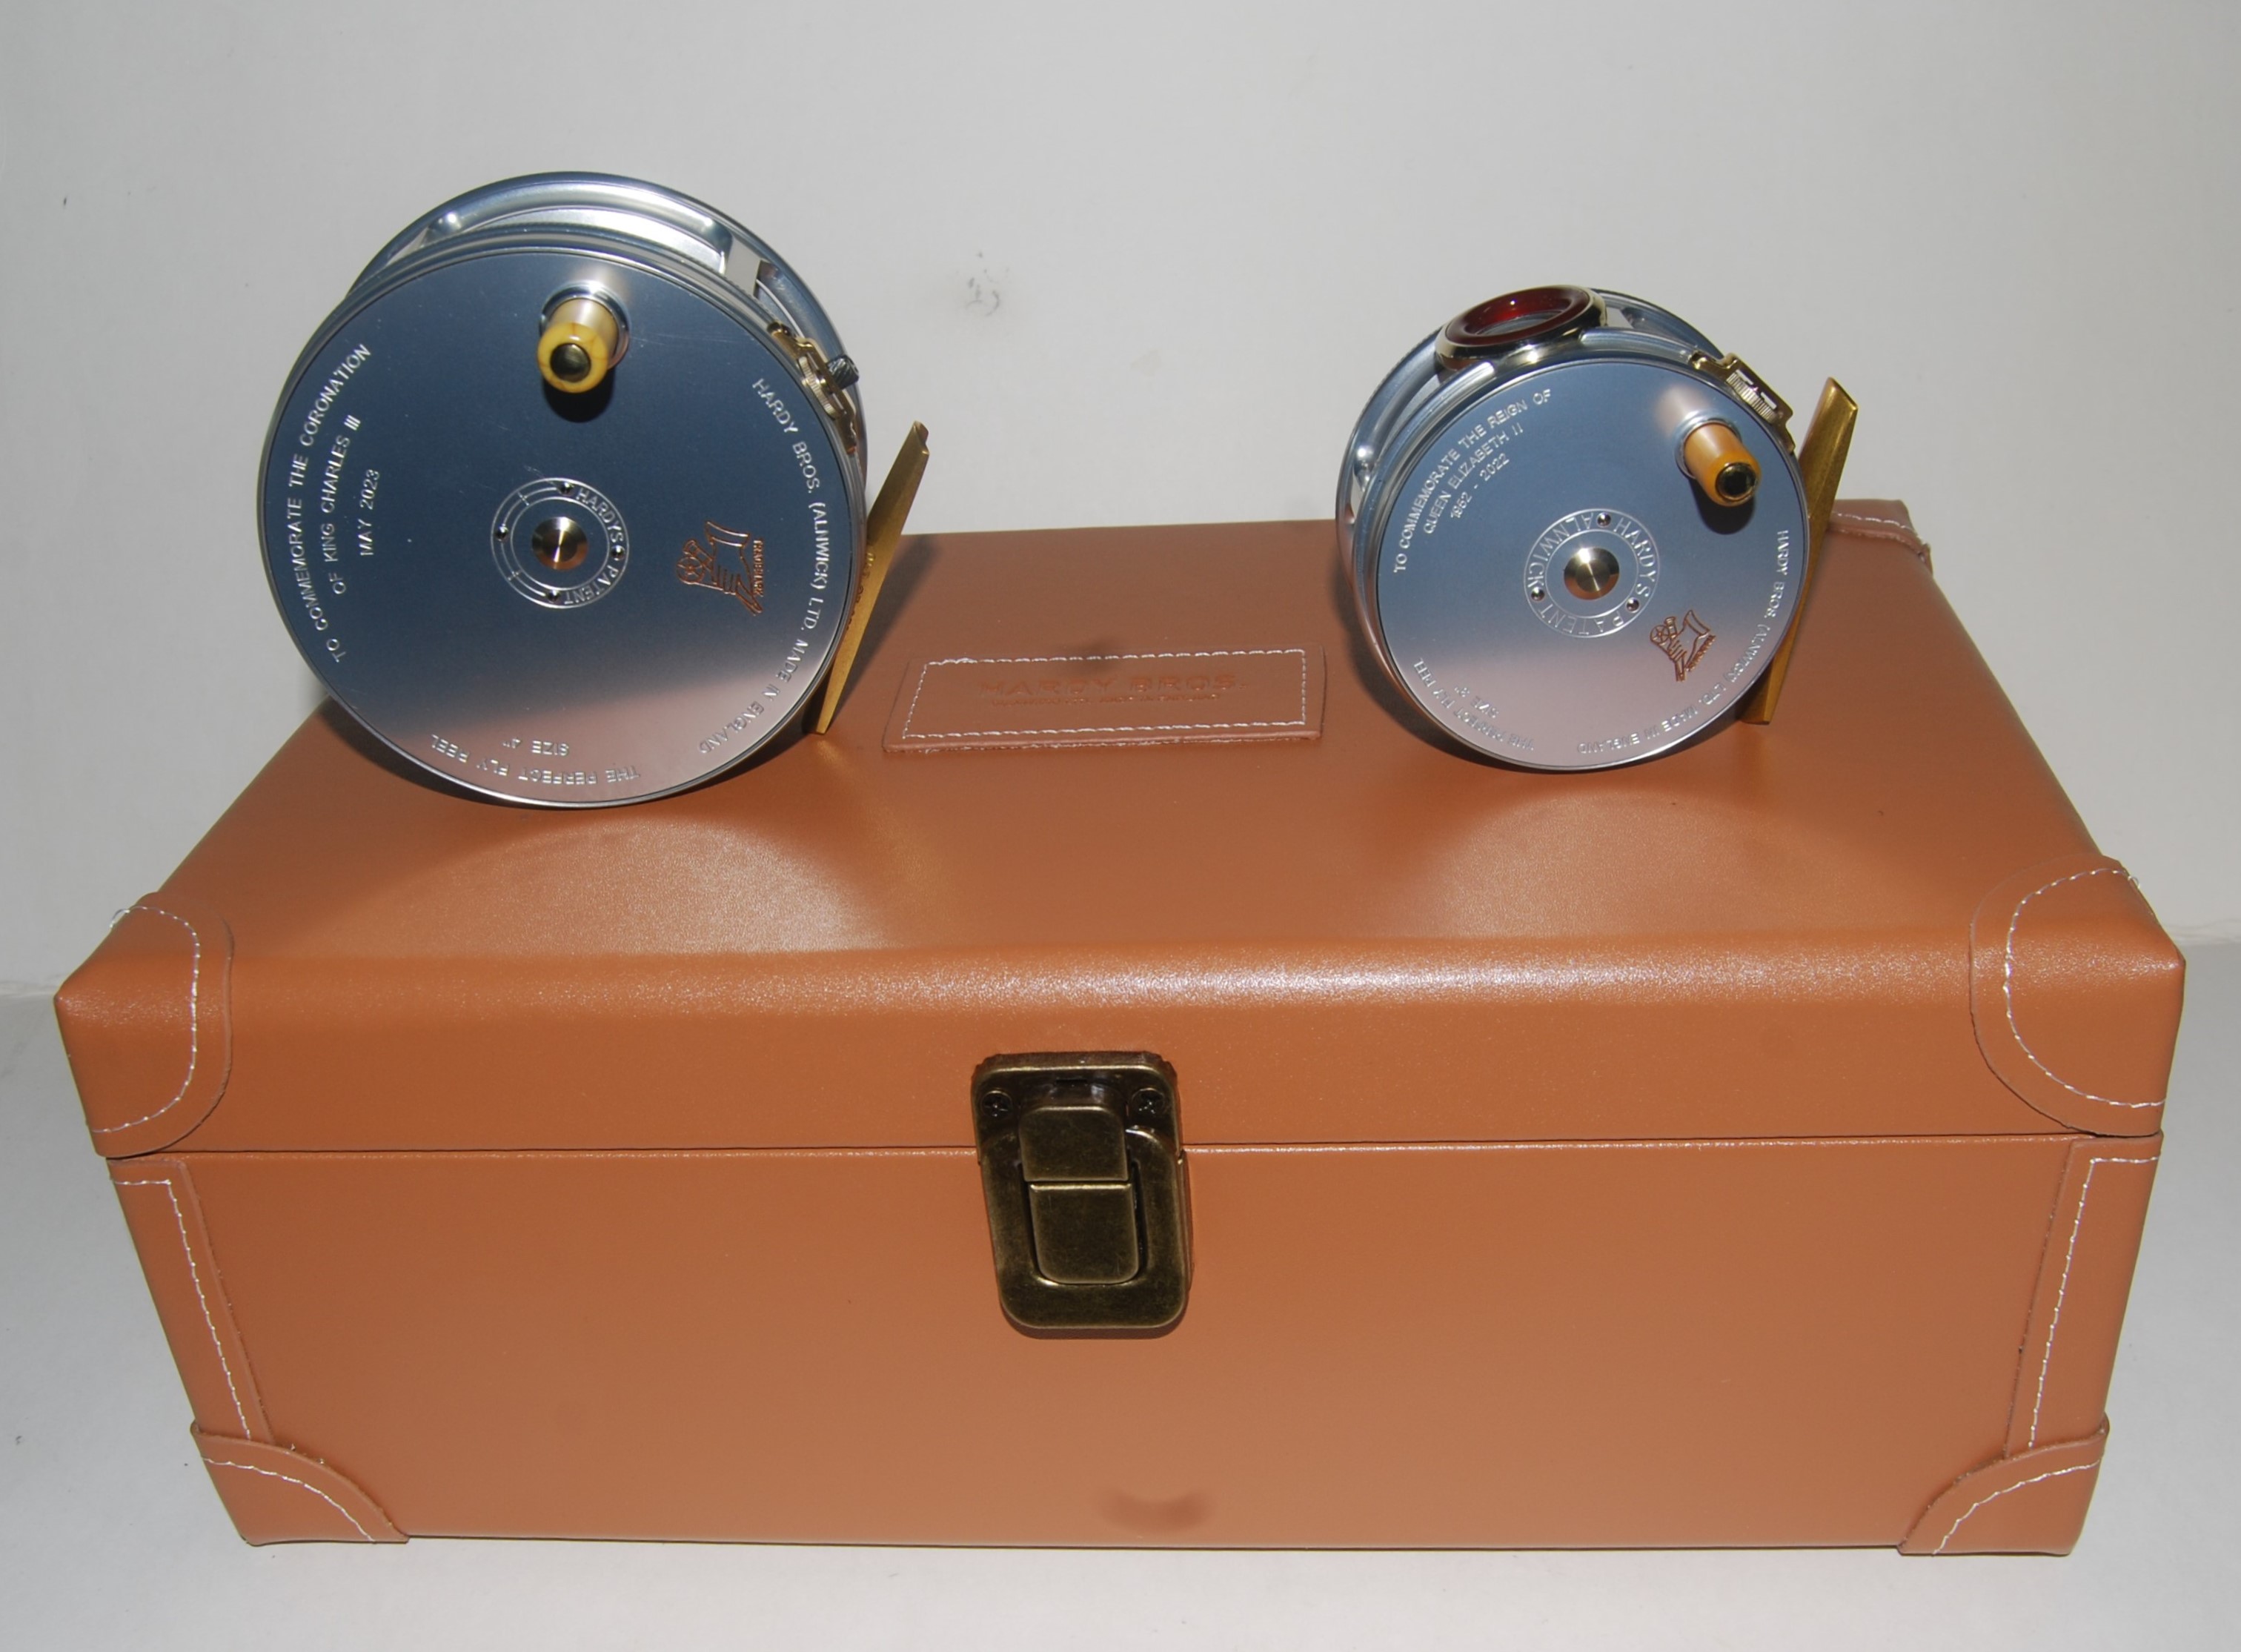 HARDY ROYAL COMMEMORATIVE PERFECT REEL SET. LHW. Limited Edition. One of  250 Sets. Each set consists of two reels: The 3 in. Queen's Reel, and the 4